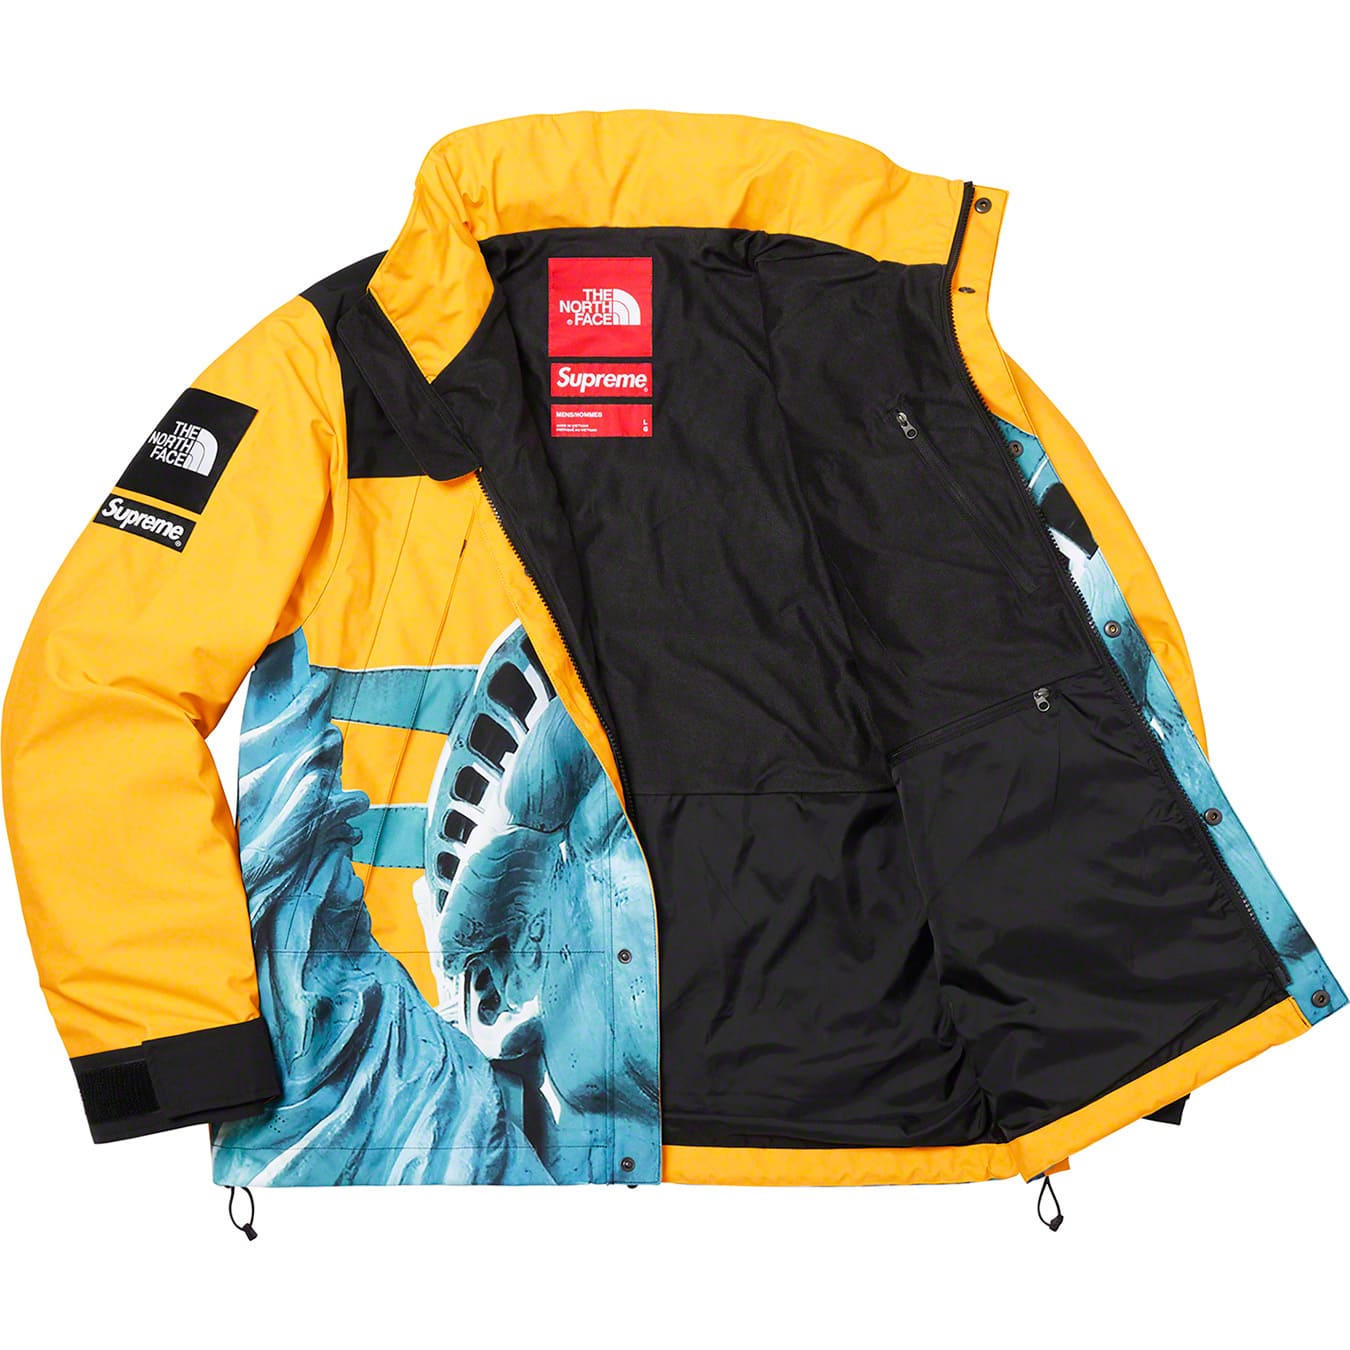 Supreme®/The North Face® Statue of Liberty Mountain Jacket